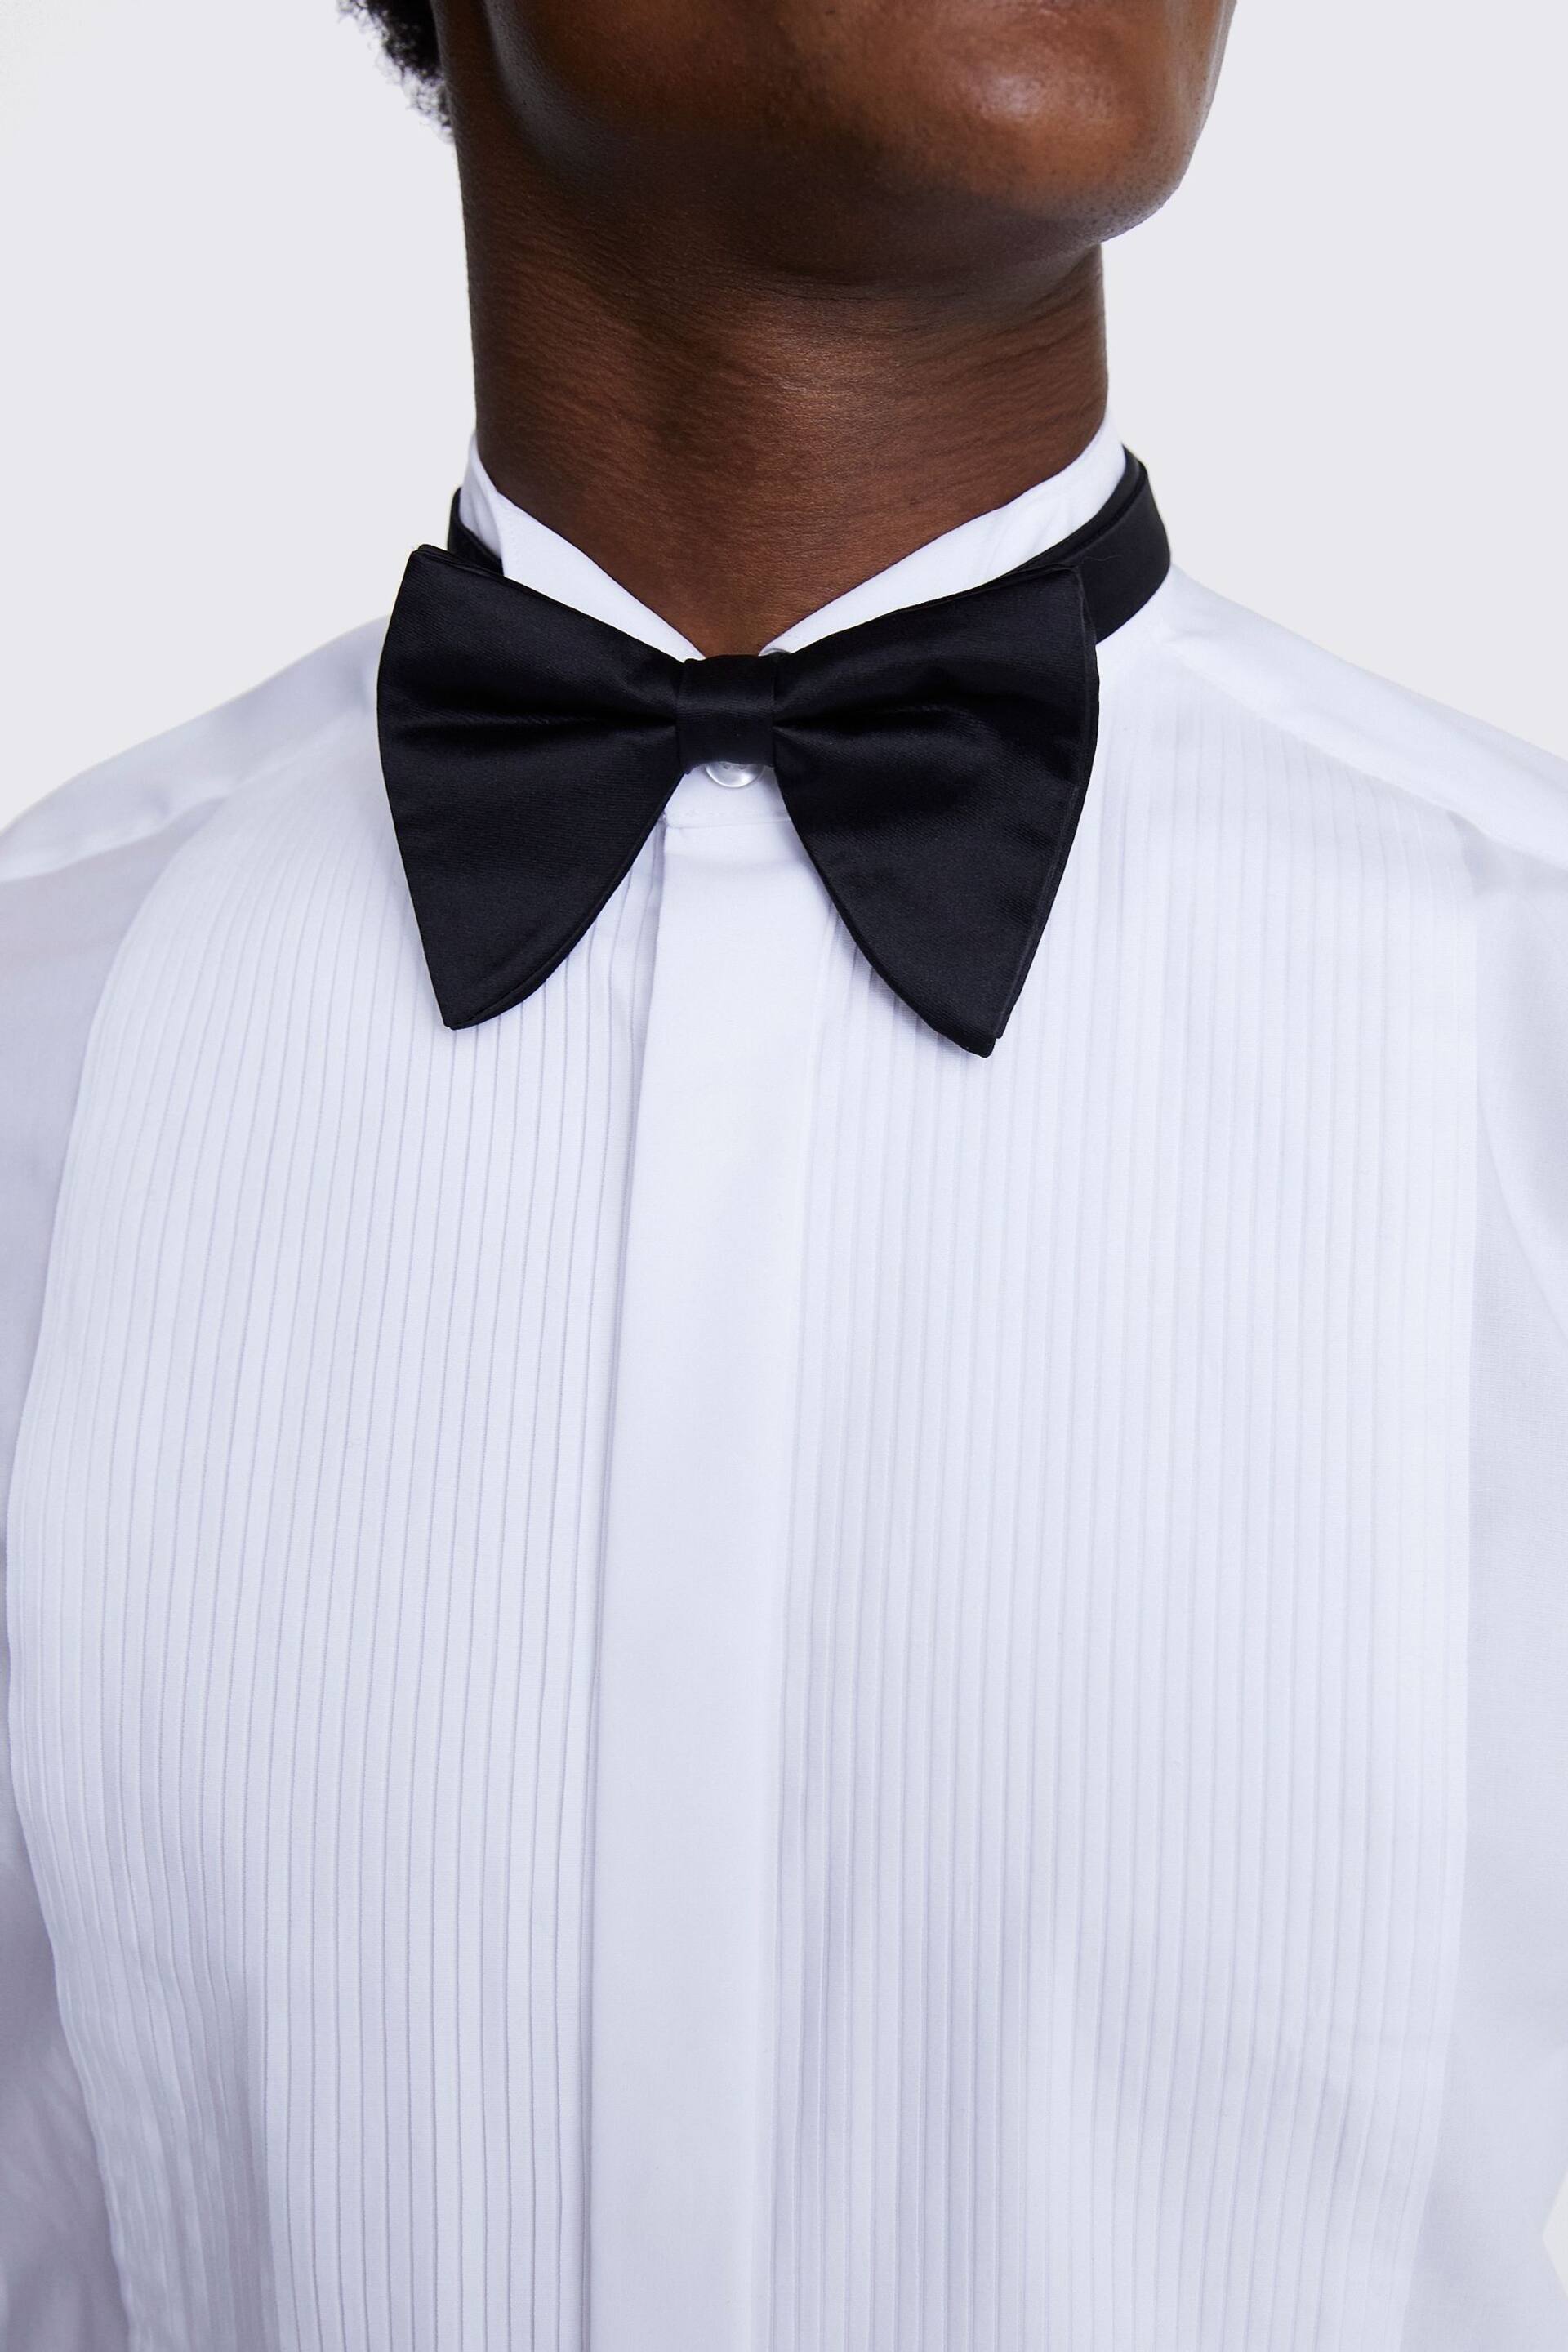 MOSS White Tailored Fit Wing Collar Pleated Dress Shirt - Image 2 of 4